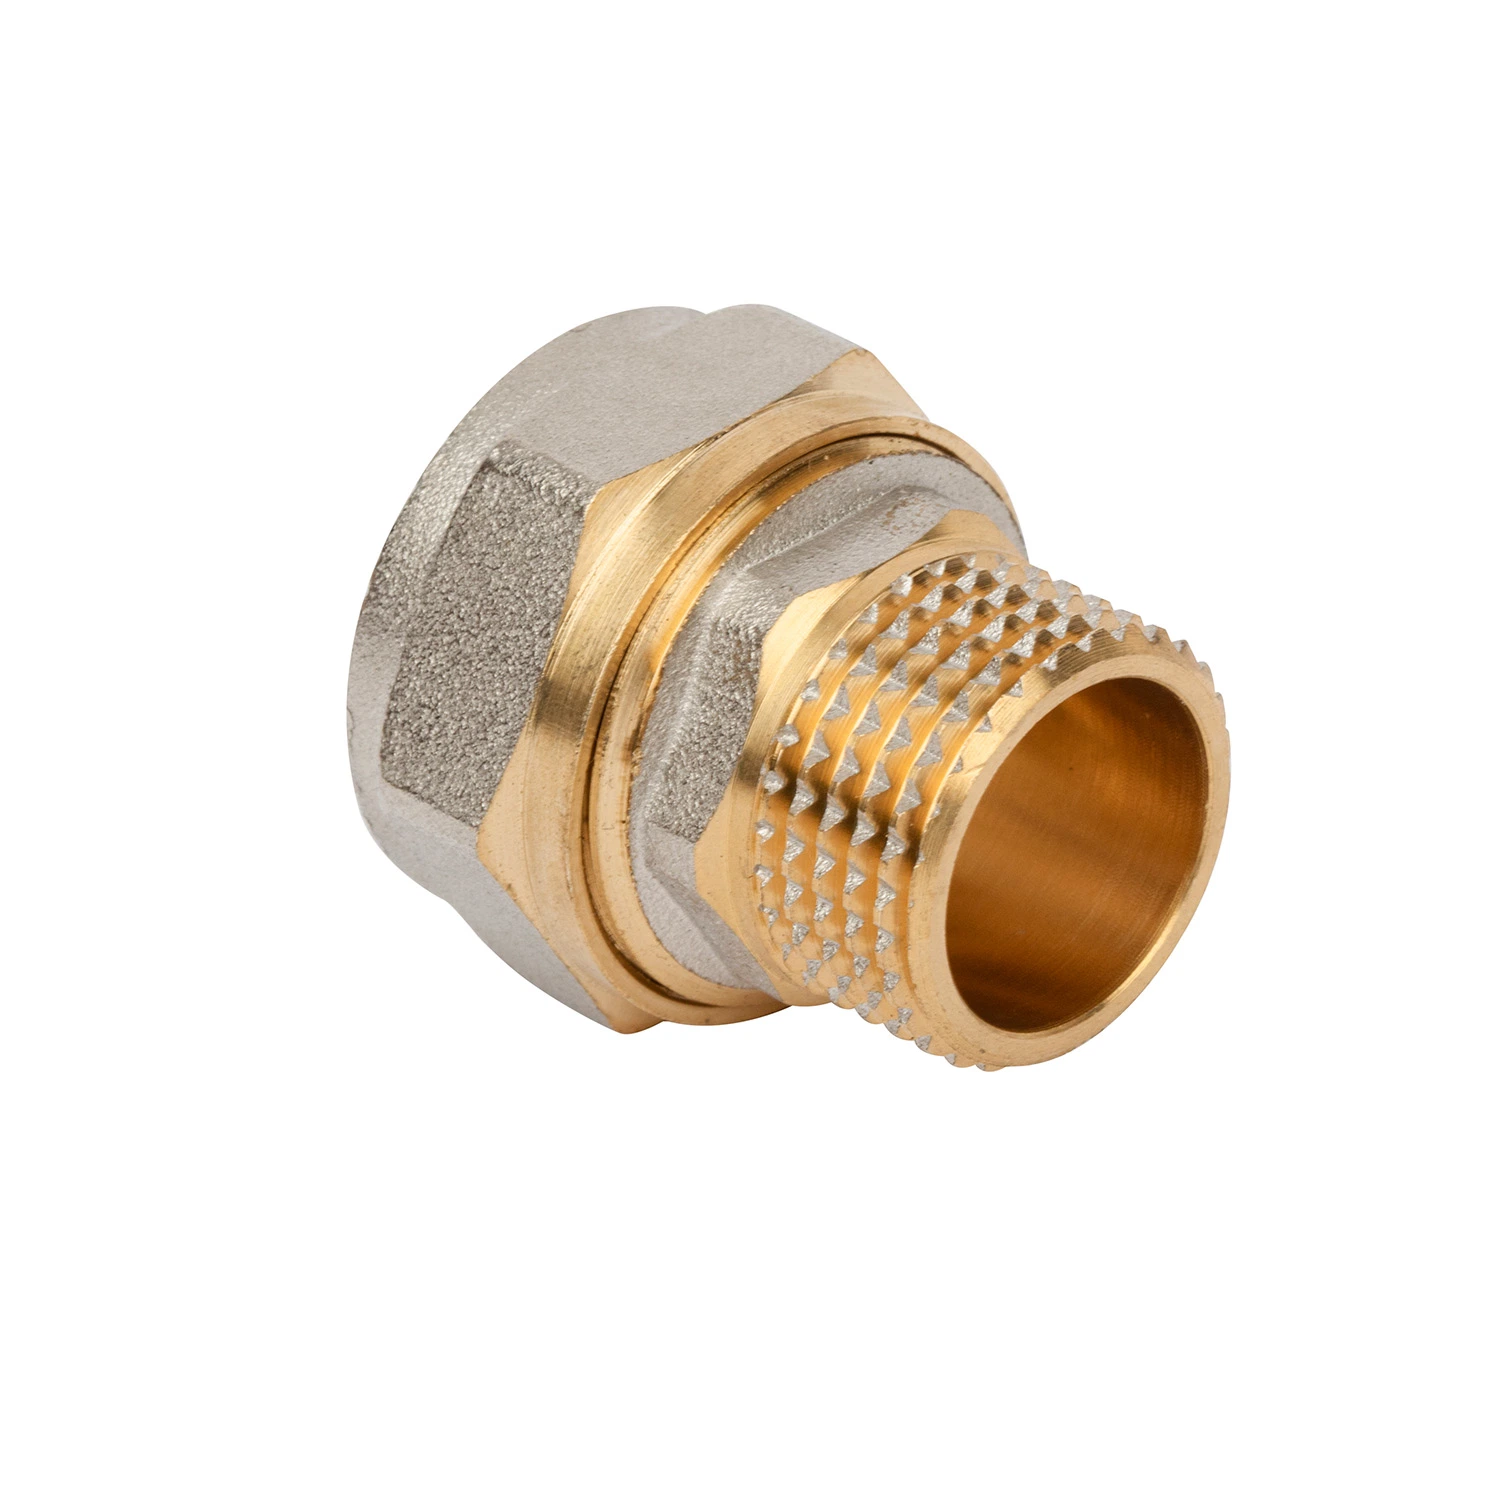 Straight Connector Compression Brass Fittings for PE Pipe Good at Tightness